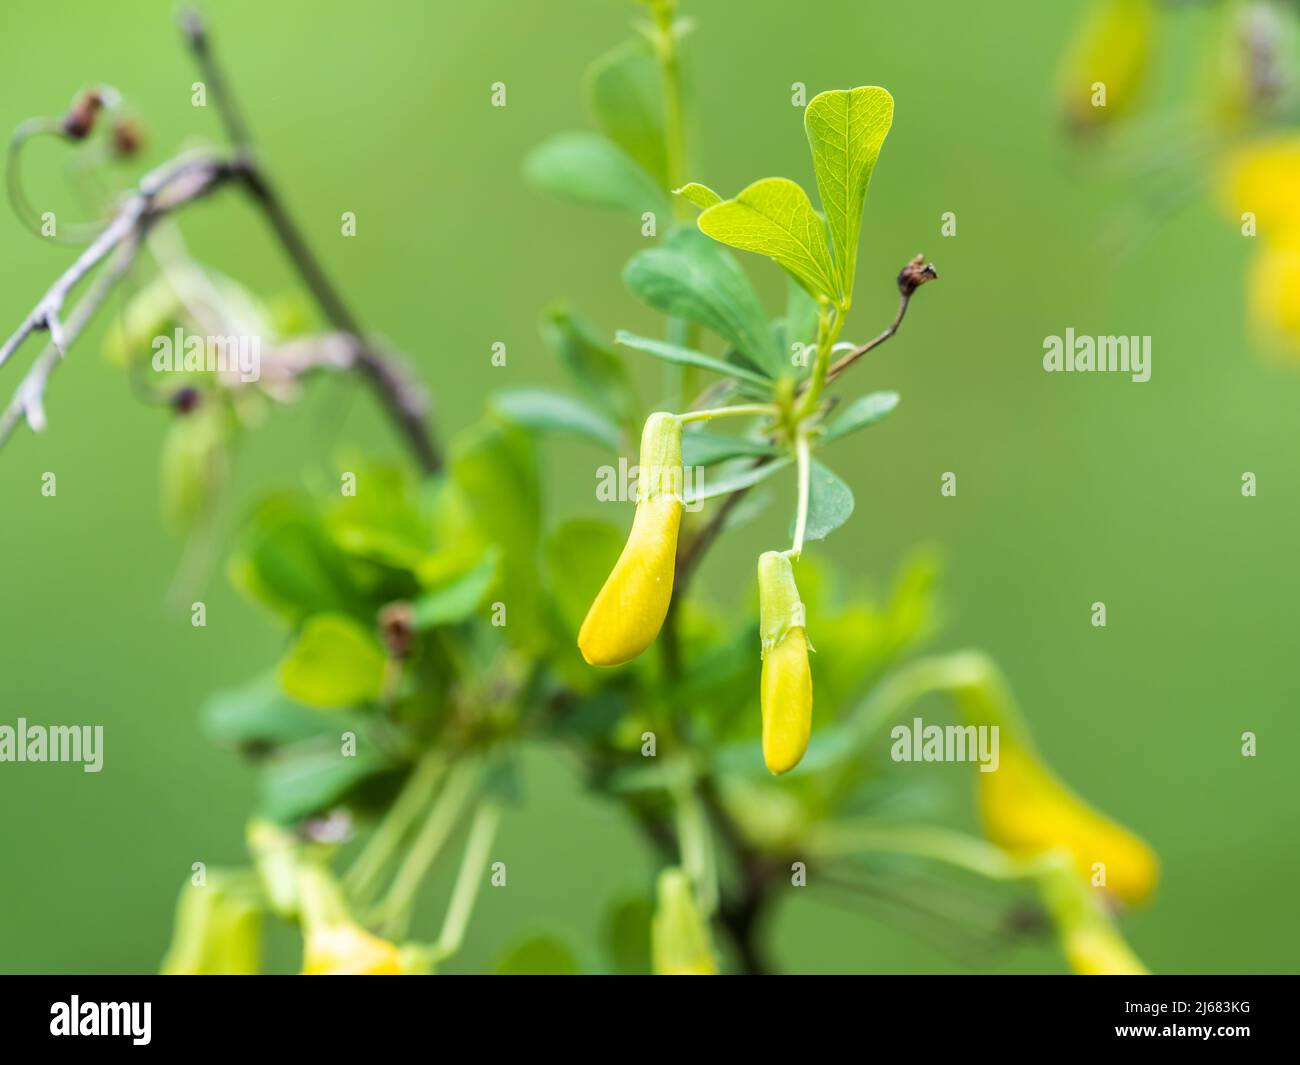 Acacia tree branch with green leaves and yellow flowers. Blooming Caragana Arborescens, the Siberian peashrub, Siberian pea-tree, or caragana Stock Photo